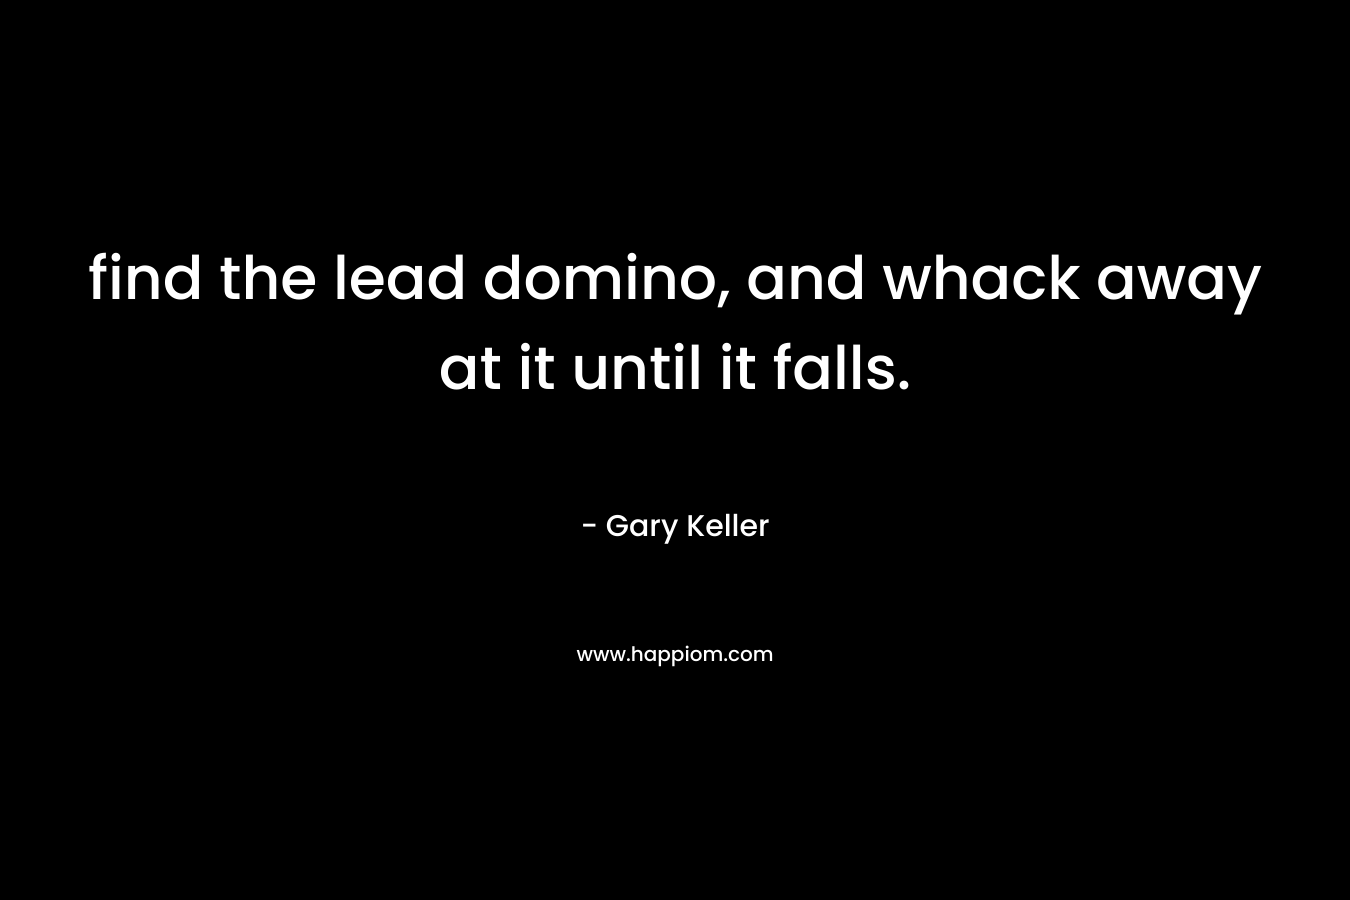 find the lead domino, and whack away at it until it falls. – Gary Keller